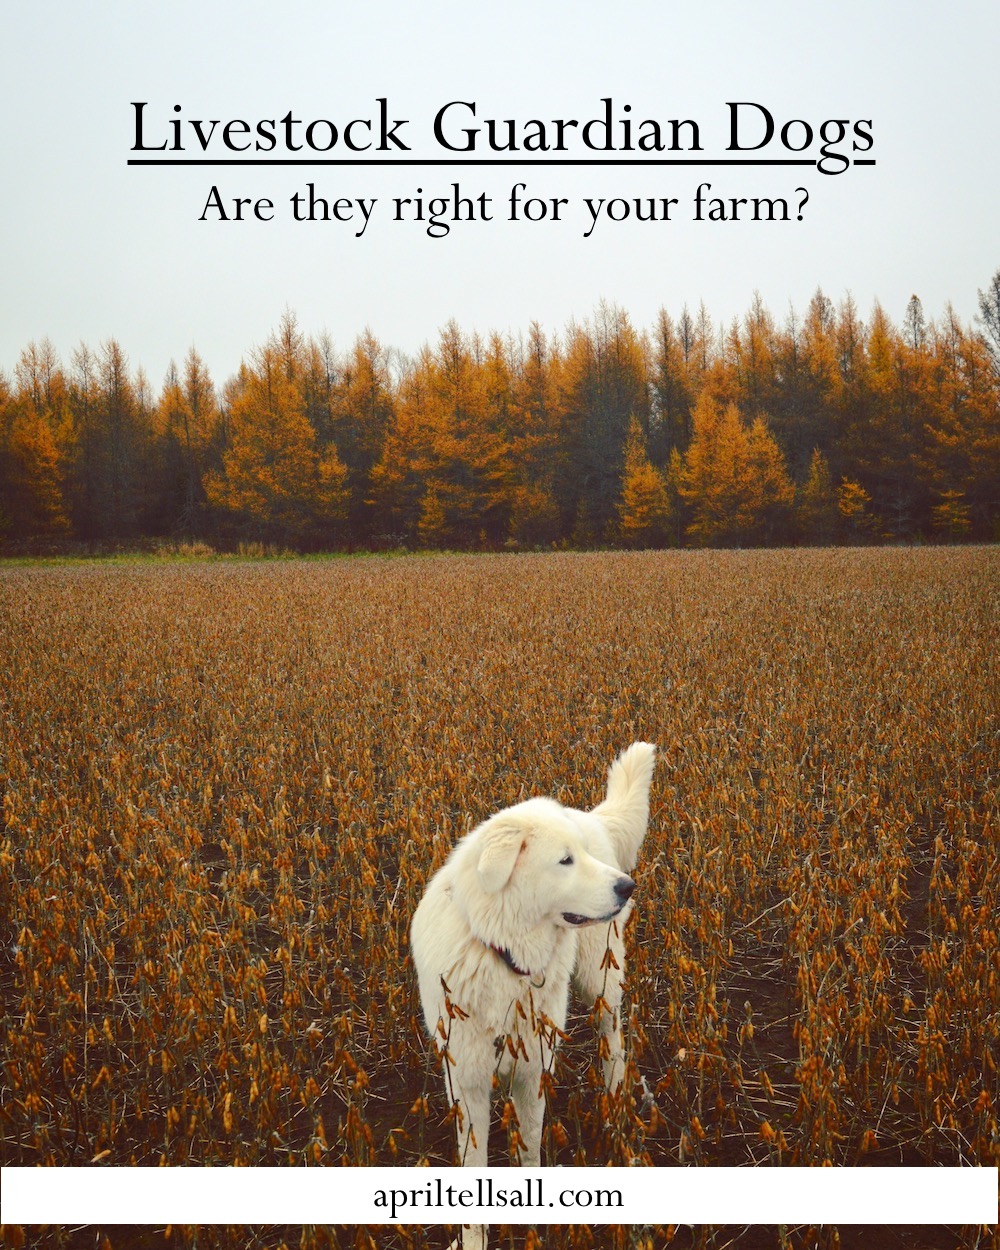 Livestock Guardian Dogs: Are They Right For Your Farm?